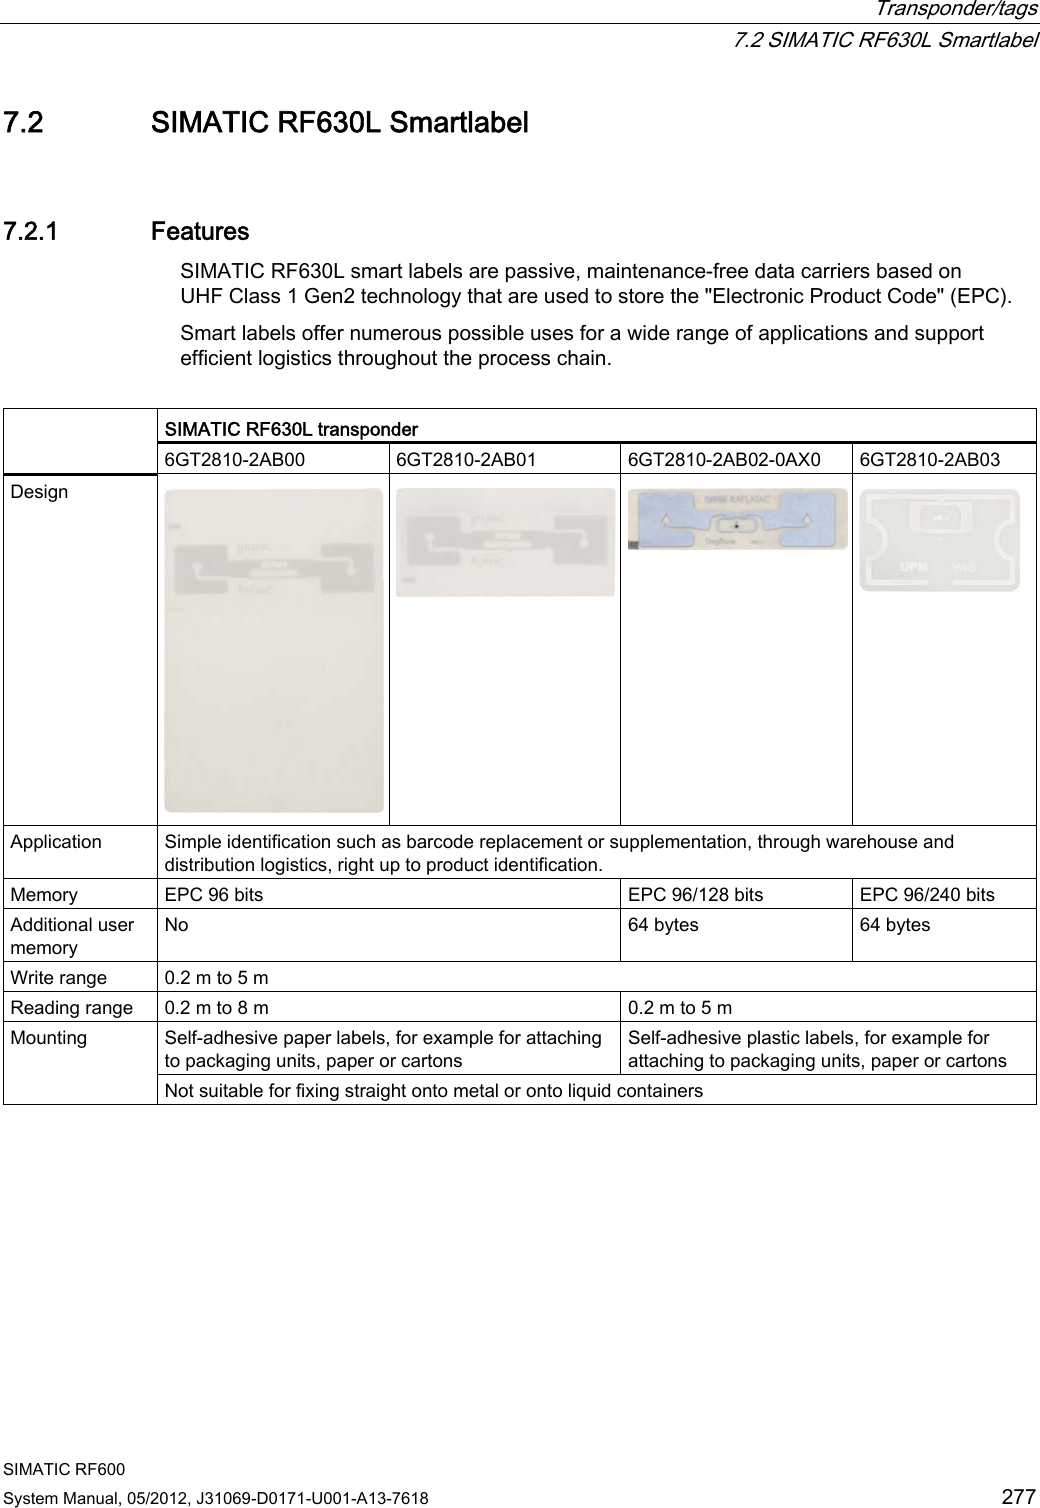  Transponder/tags  7.2 SIMATIC RF630L Smartlabel SIMATIC RF600 System Manual, 05/2012, J31069-D0171-U001-A13-7618  277 7.2 SIMATIC RF630L Smartlabel 7.2.1 Features SIMATIC RF630L smart labels are passive, maintenance-free data carriers based on UHF Class 1 Gen2 technology that are used to store the &quot;Electronic Product Code&quot; (EPC). Smart labels offer numerous possible uses for a wide range of applications and support efficient logistics throughout the process chain.  SIMATIC RF630L transponder  6GT2810-2AB00  6GT2810-2AB01  6GT2810-2AB02-0AX0  6GT2810-2AB03 Design    Application  Simple identification such as barcode replacement or supplementation, through warehouse and distribution logistics, right up to product identification. Memory  EPC 96 bits  EPC 96/128 bits  EPC 96/240 bits Additional user memory No  64 bytes  64 bytes Write range  0.2 m to 5 m Reading range  0.2 m to 8 m  0.2 m to 5 m Self-adhesive paper labels, for example for attaching to packaging units, paper or cartons Self-adhesive plastic labels, for example for attaching to packaging units, paper or cartons Mounting Not suitable for fixing straight onto metal or onto liquid containers 